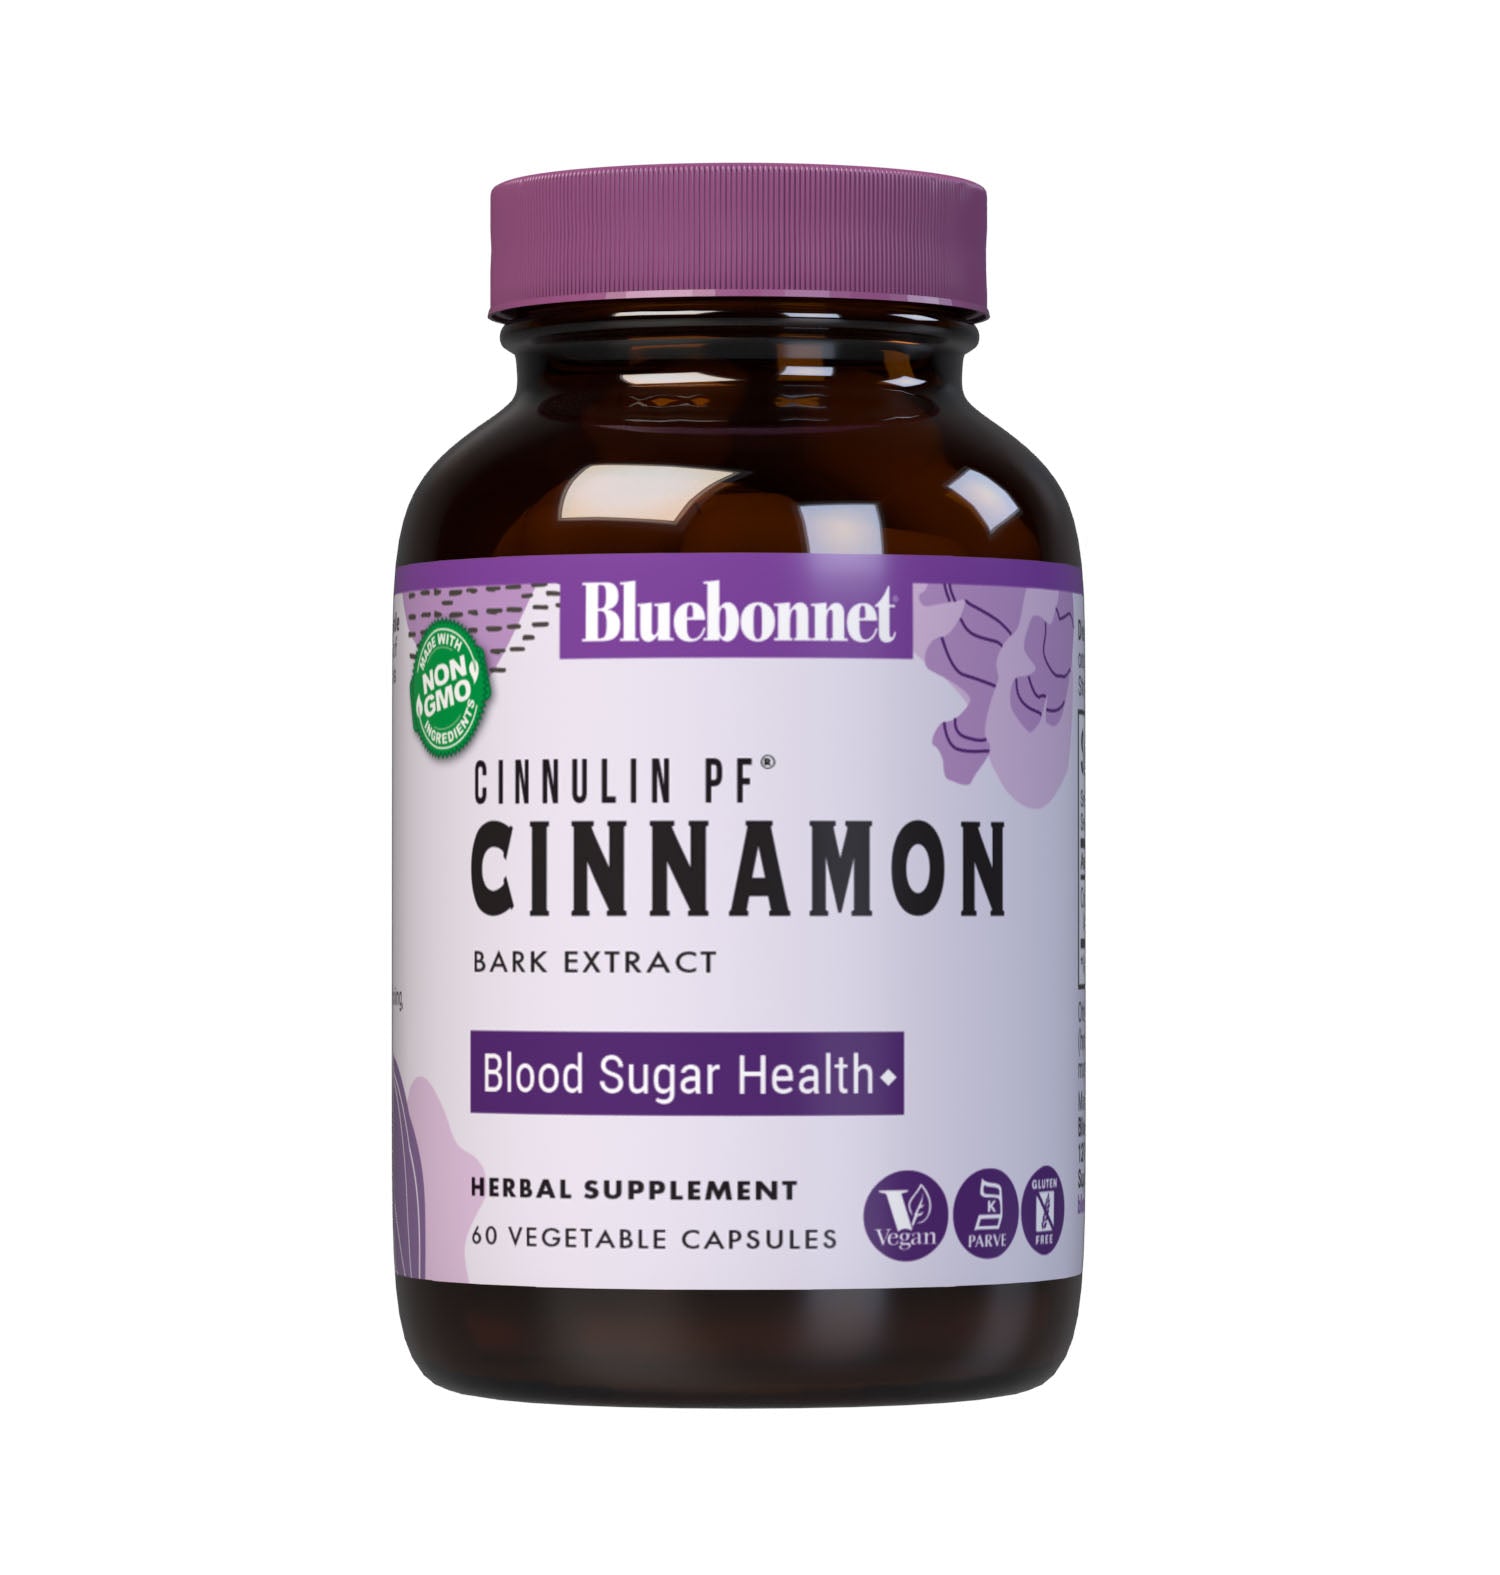 Bluebonnet’s Cinnulin PF Cinnamon Bark Extract 60 Vegetable Capsules contain a water-soluble extract that is carefully produced by a clean and gentle water-based extraction method is employed to capture and preserve cinnamon’s most valuable components while eliminating toxic compounds typically found in whole cinnamon and fat-soluble cinnamon extracts. Cinnamon may help to support healthy blood sugar levels already within normal range.  #size_60 count